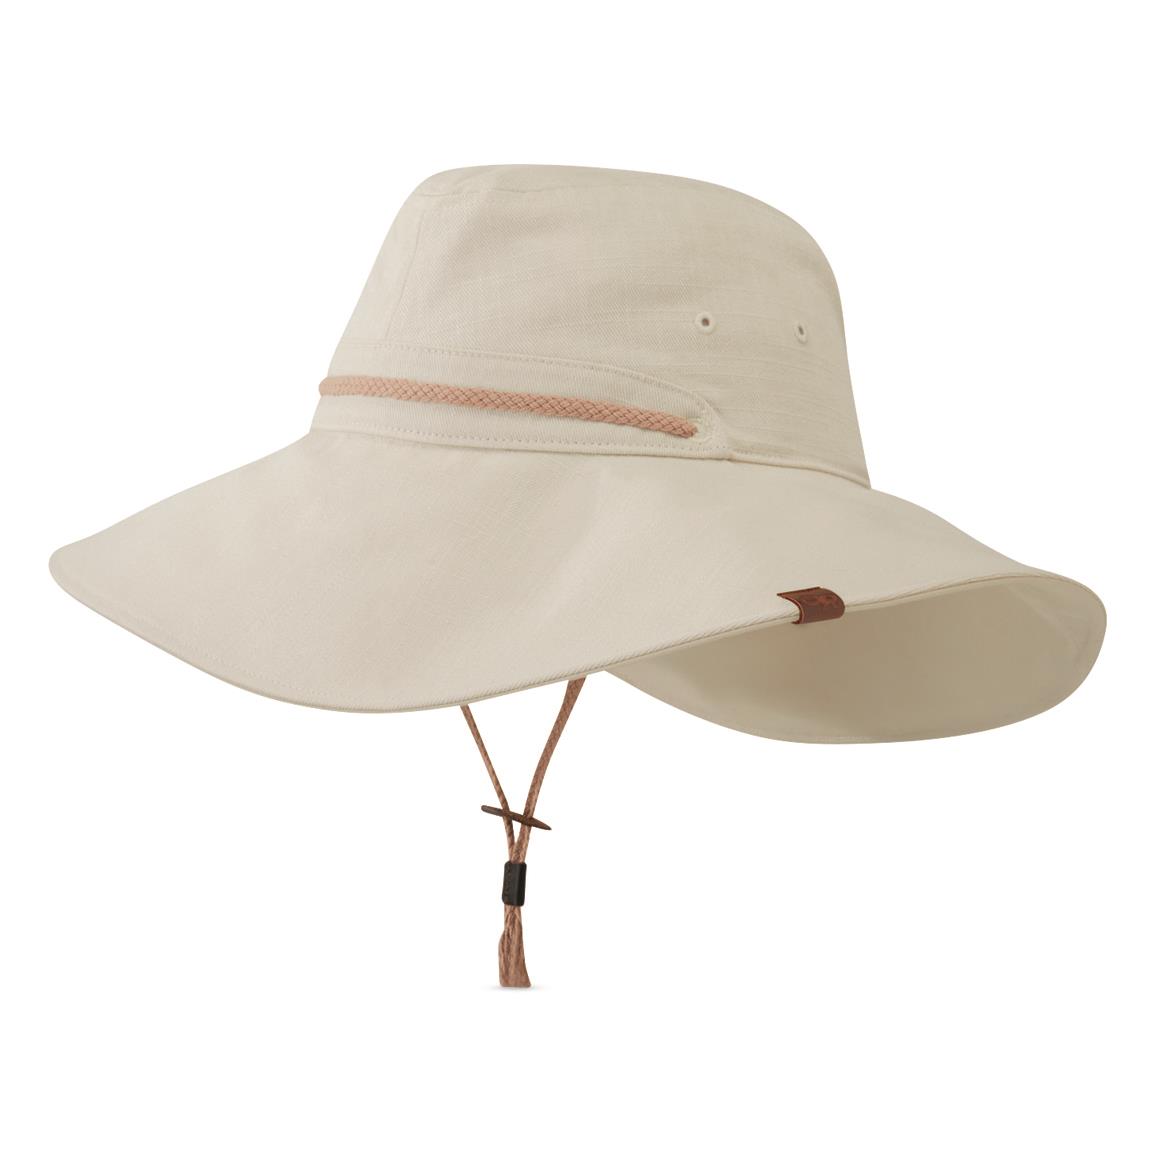 Outdoor Research Women's Mojave Sun Hat, Sand